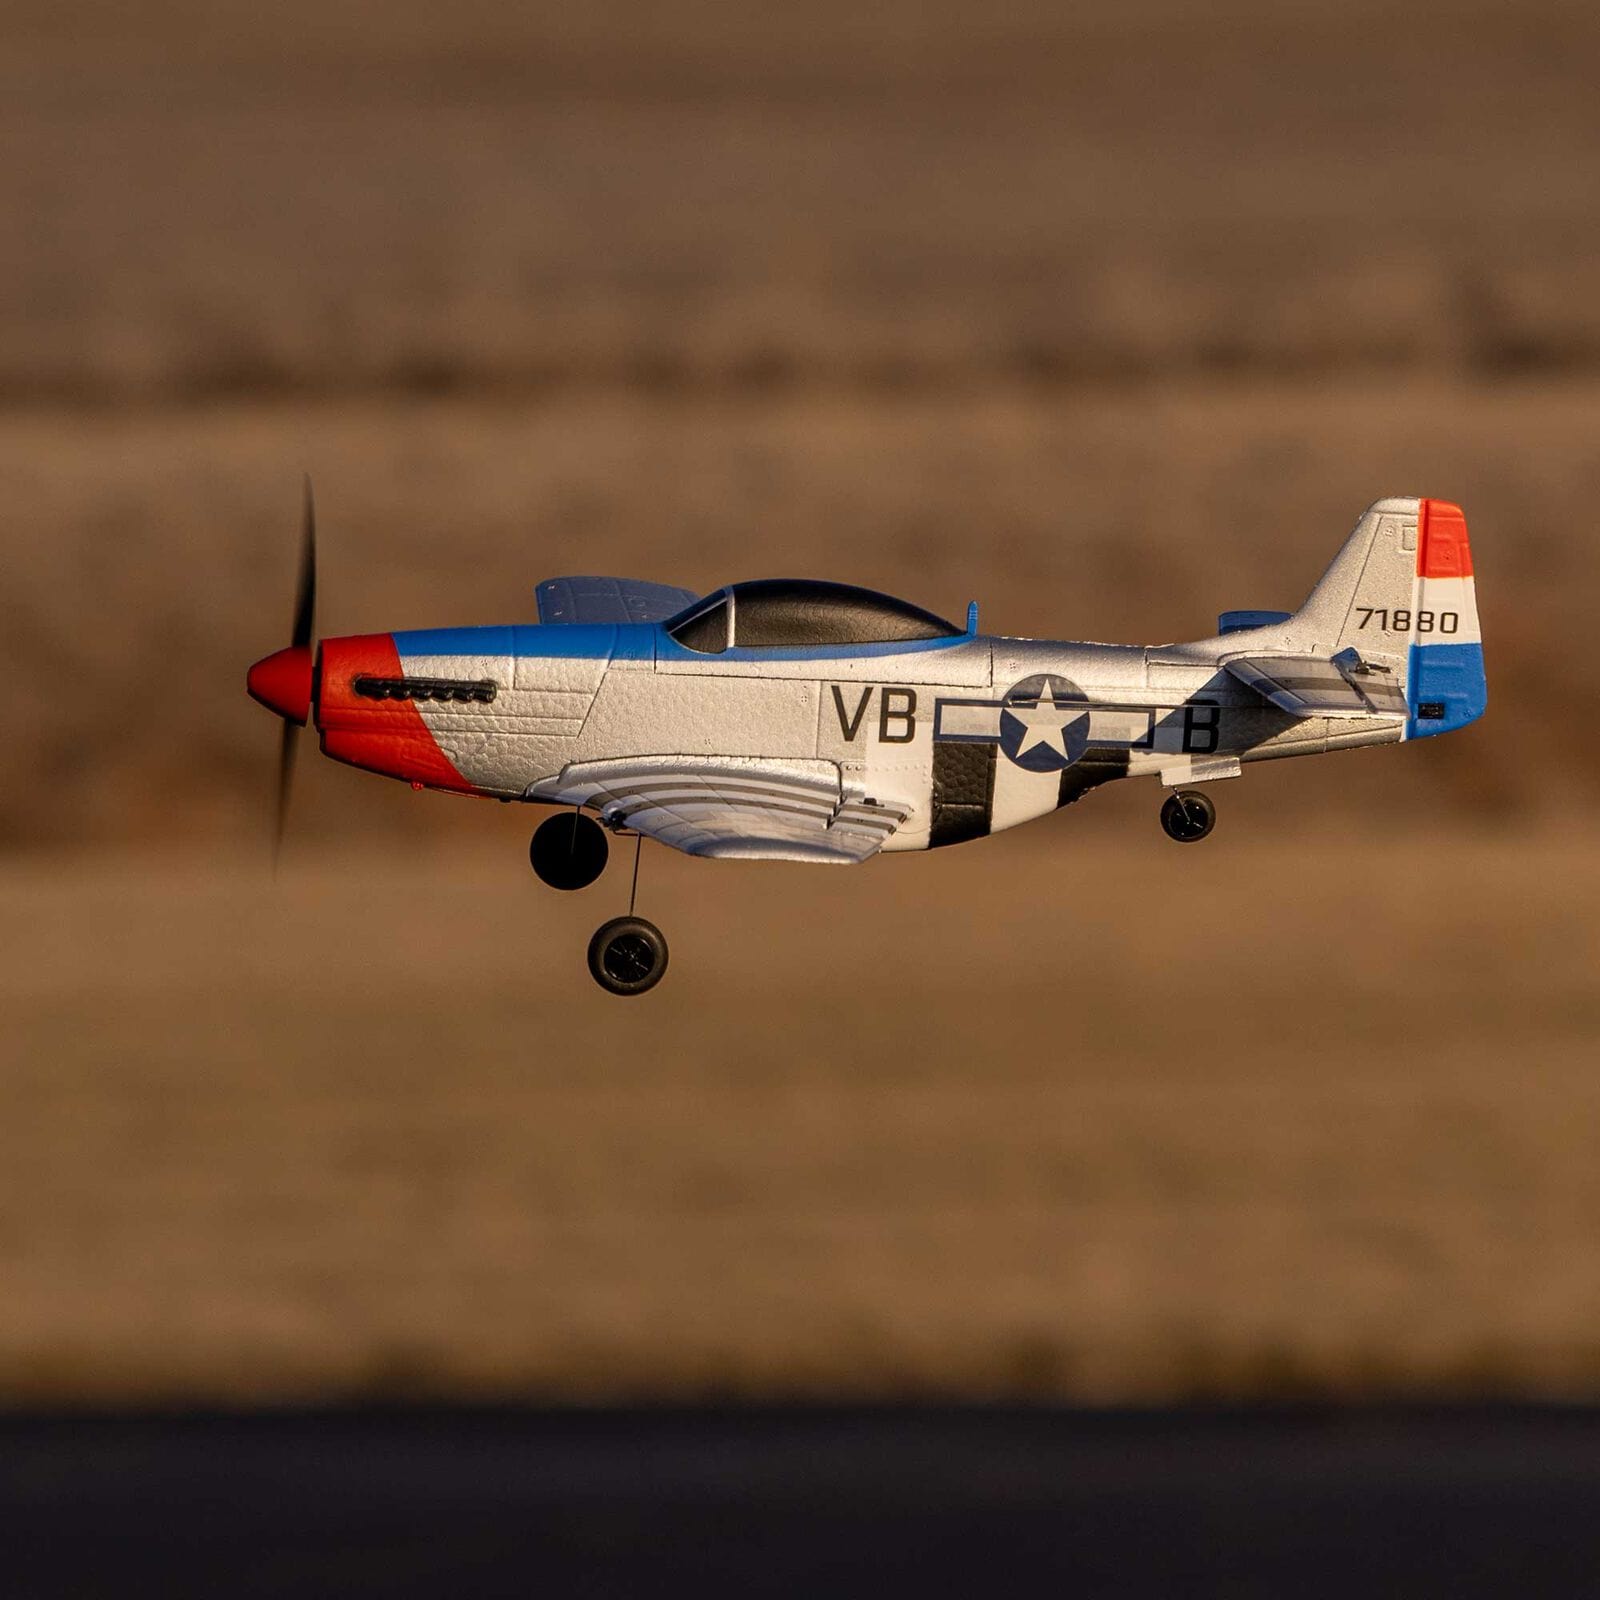 HobbyZone P-51D Mustang 450mm RTF with SAFE (HBZ-1251)